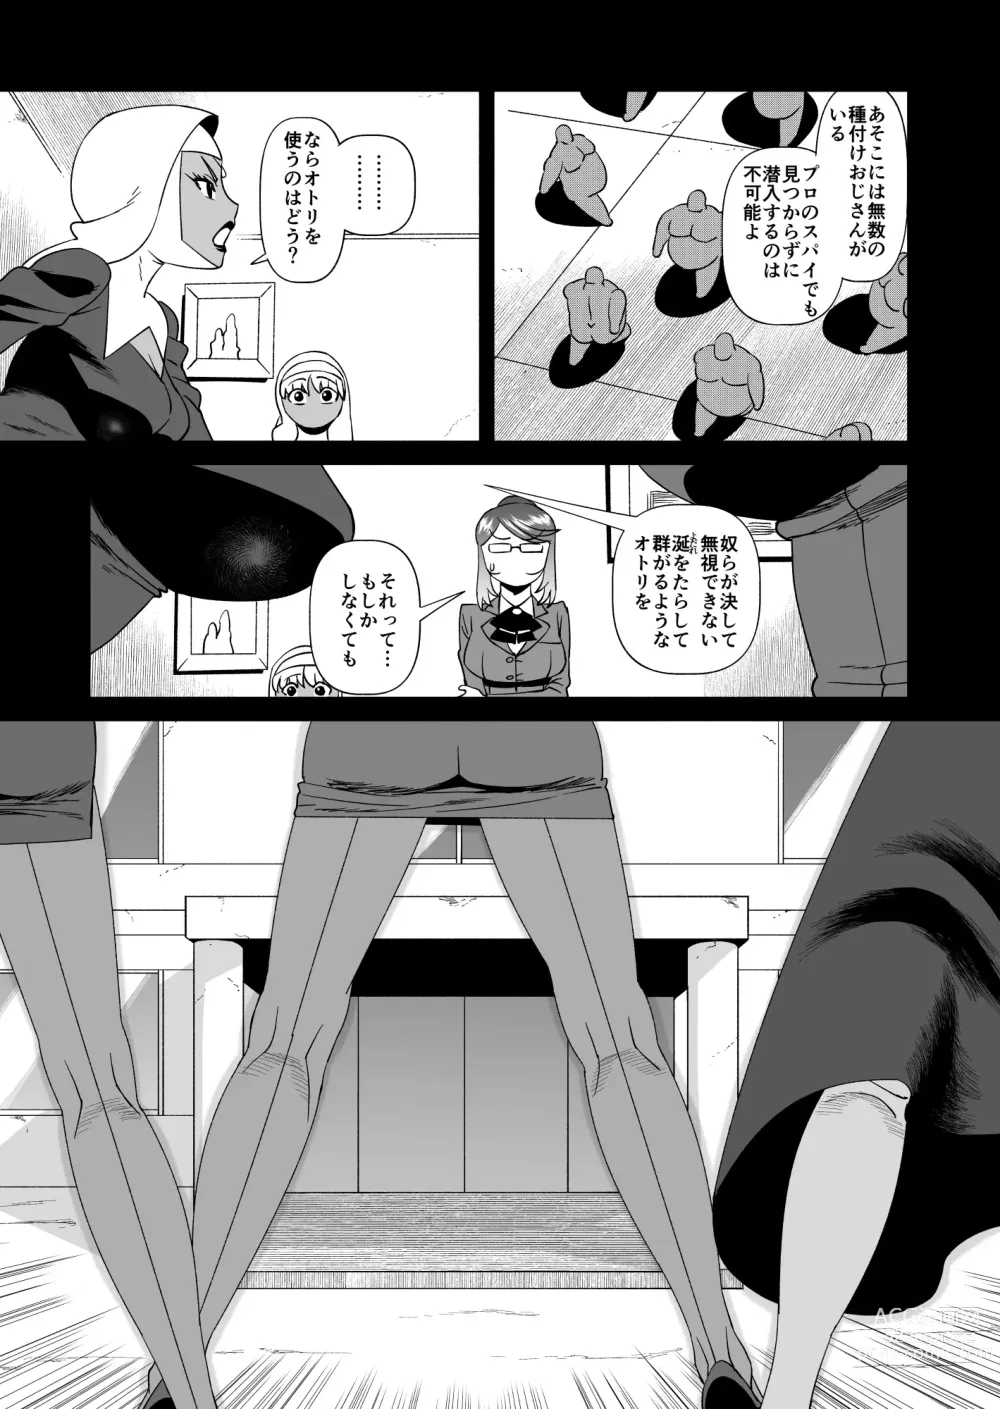 Page 14 of doujinshi CASTRATER 4